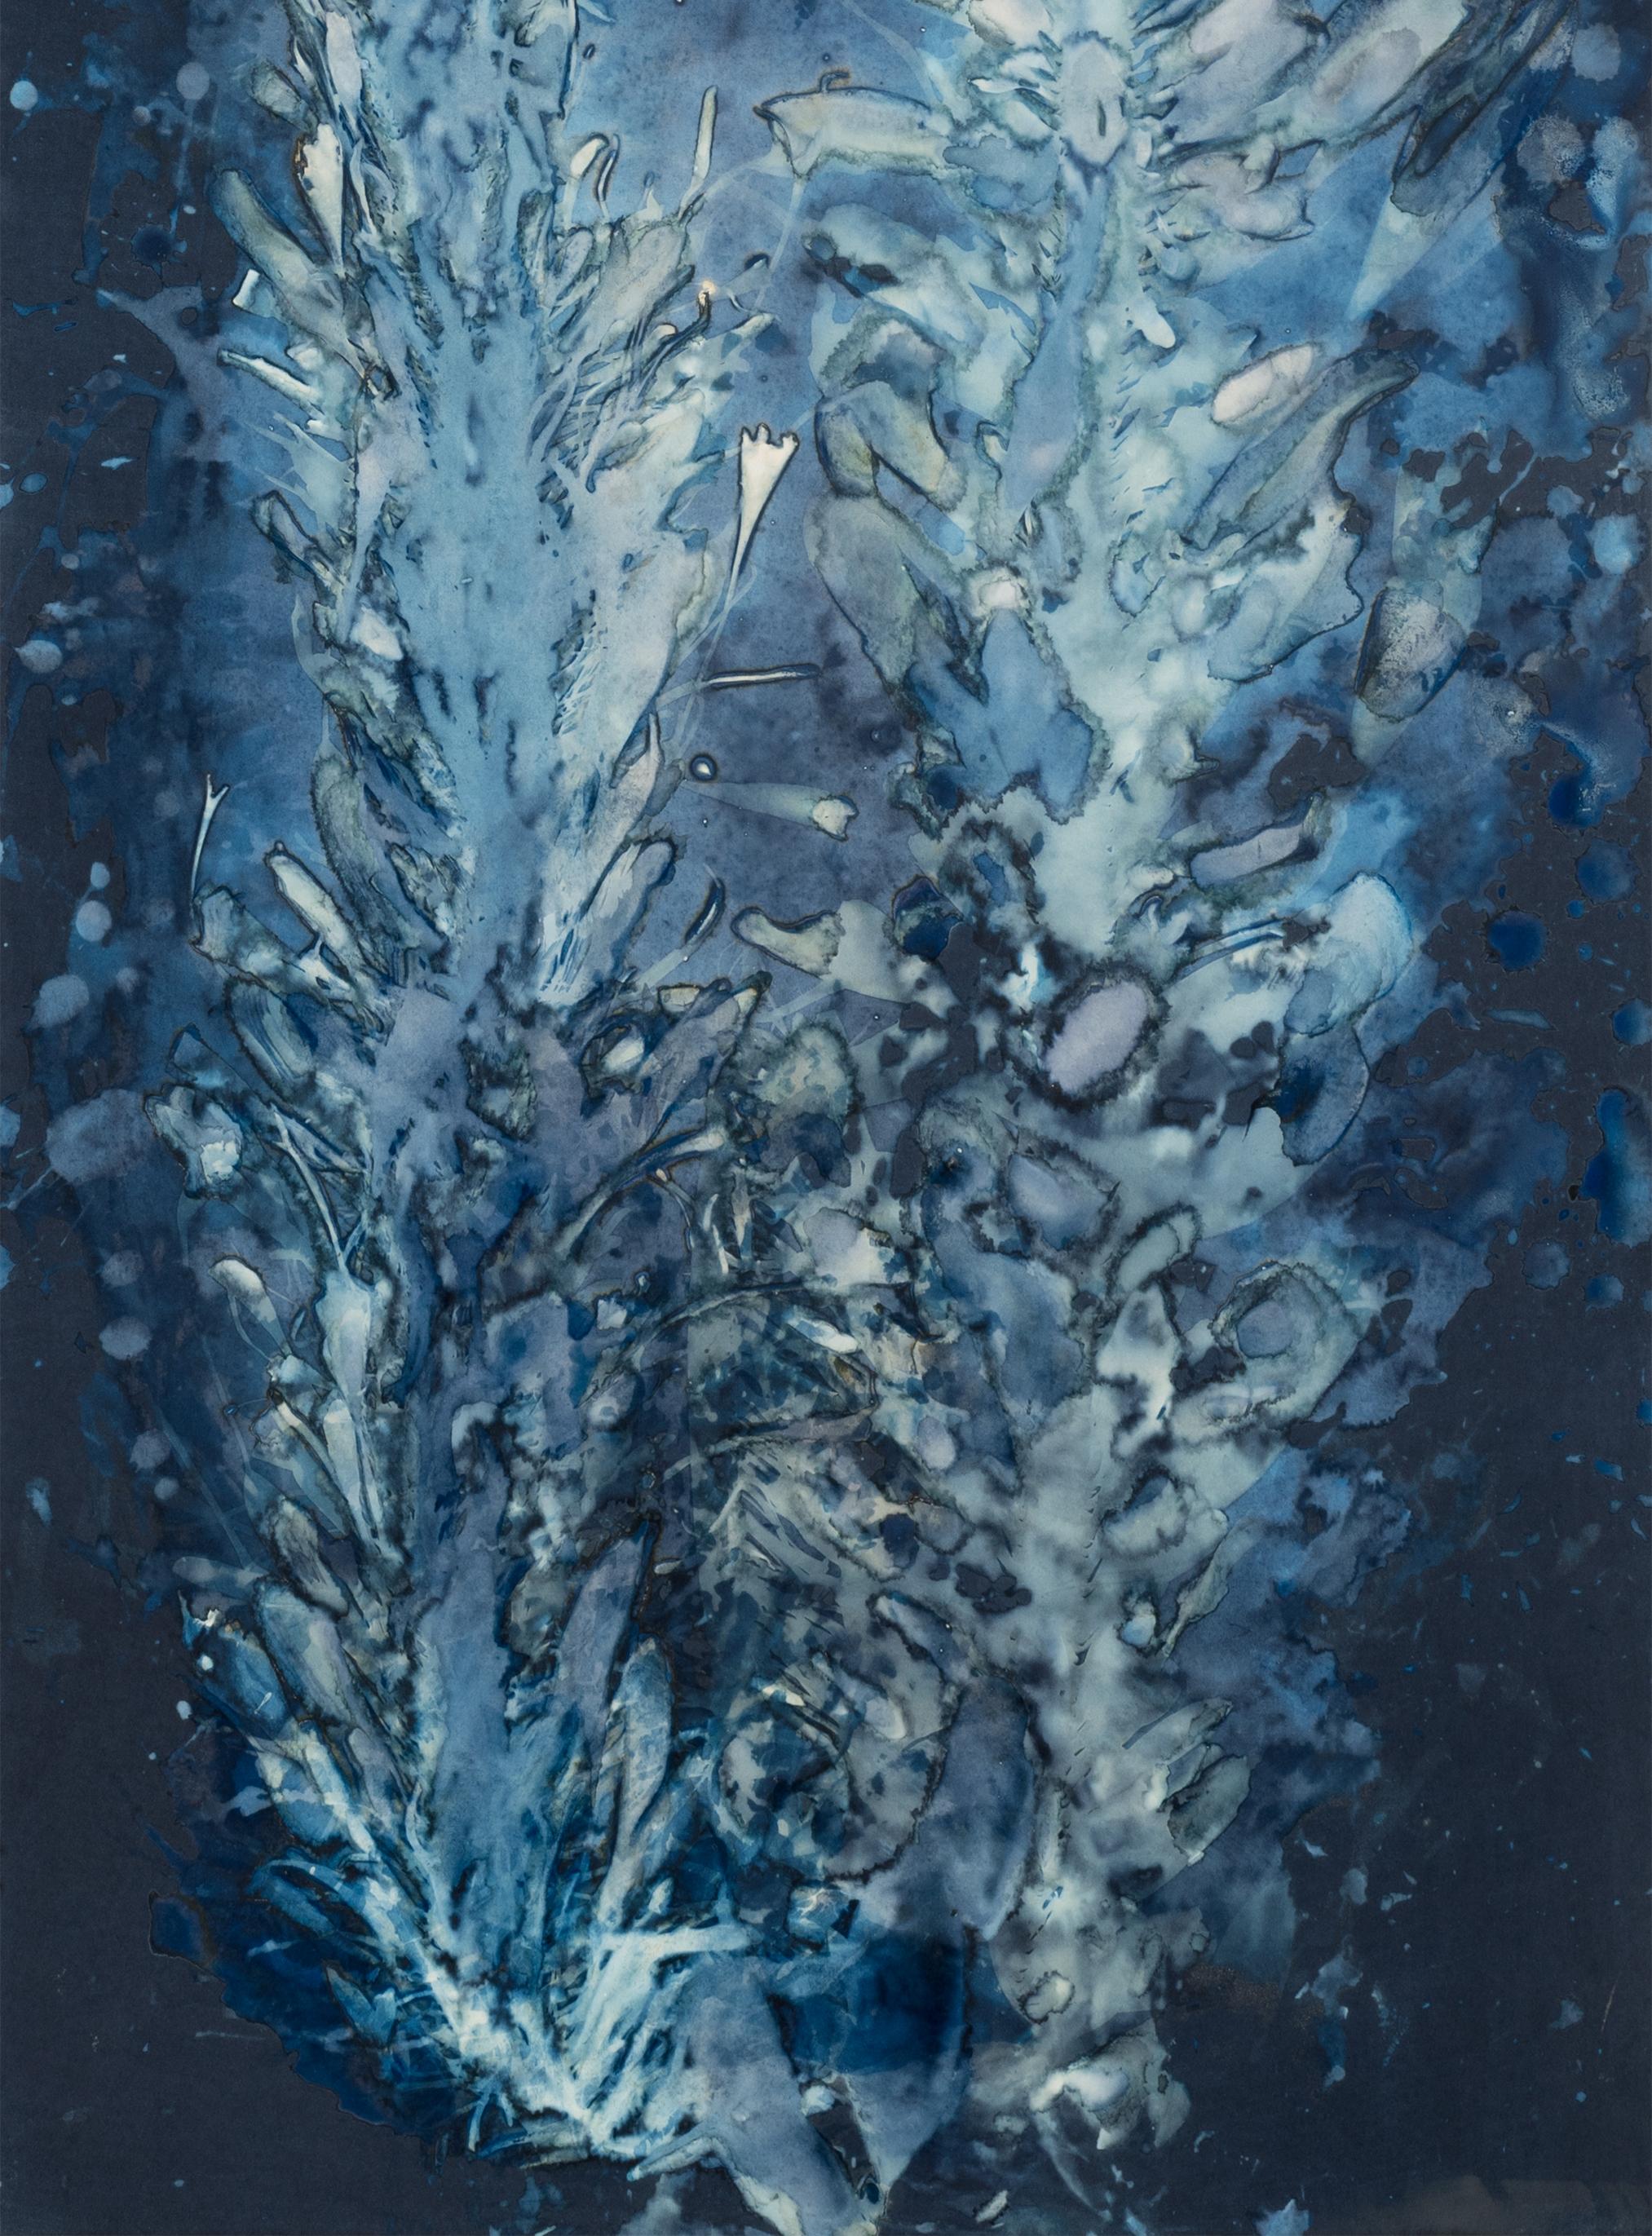 Laminariales VIII. From the series Bosque Cyanotype photograhs  - Abstract Photograph by Paola Davila